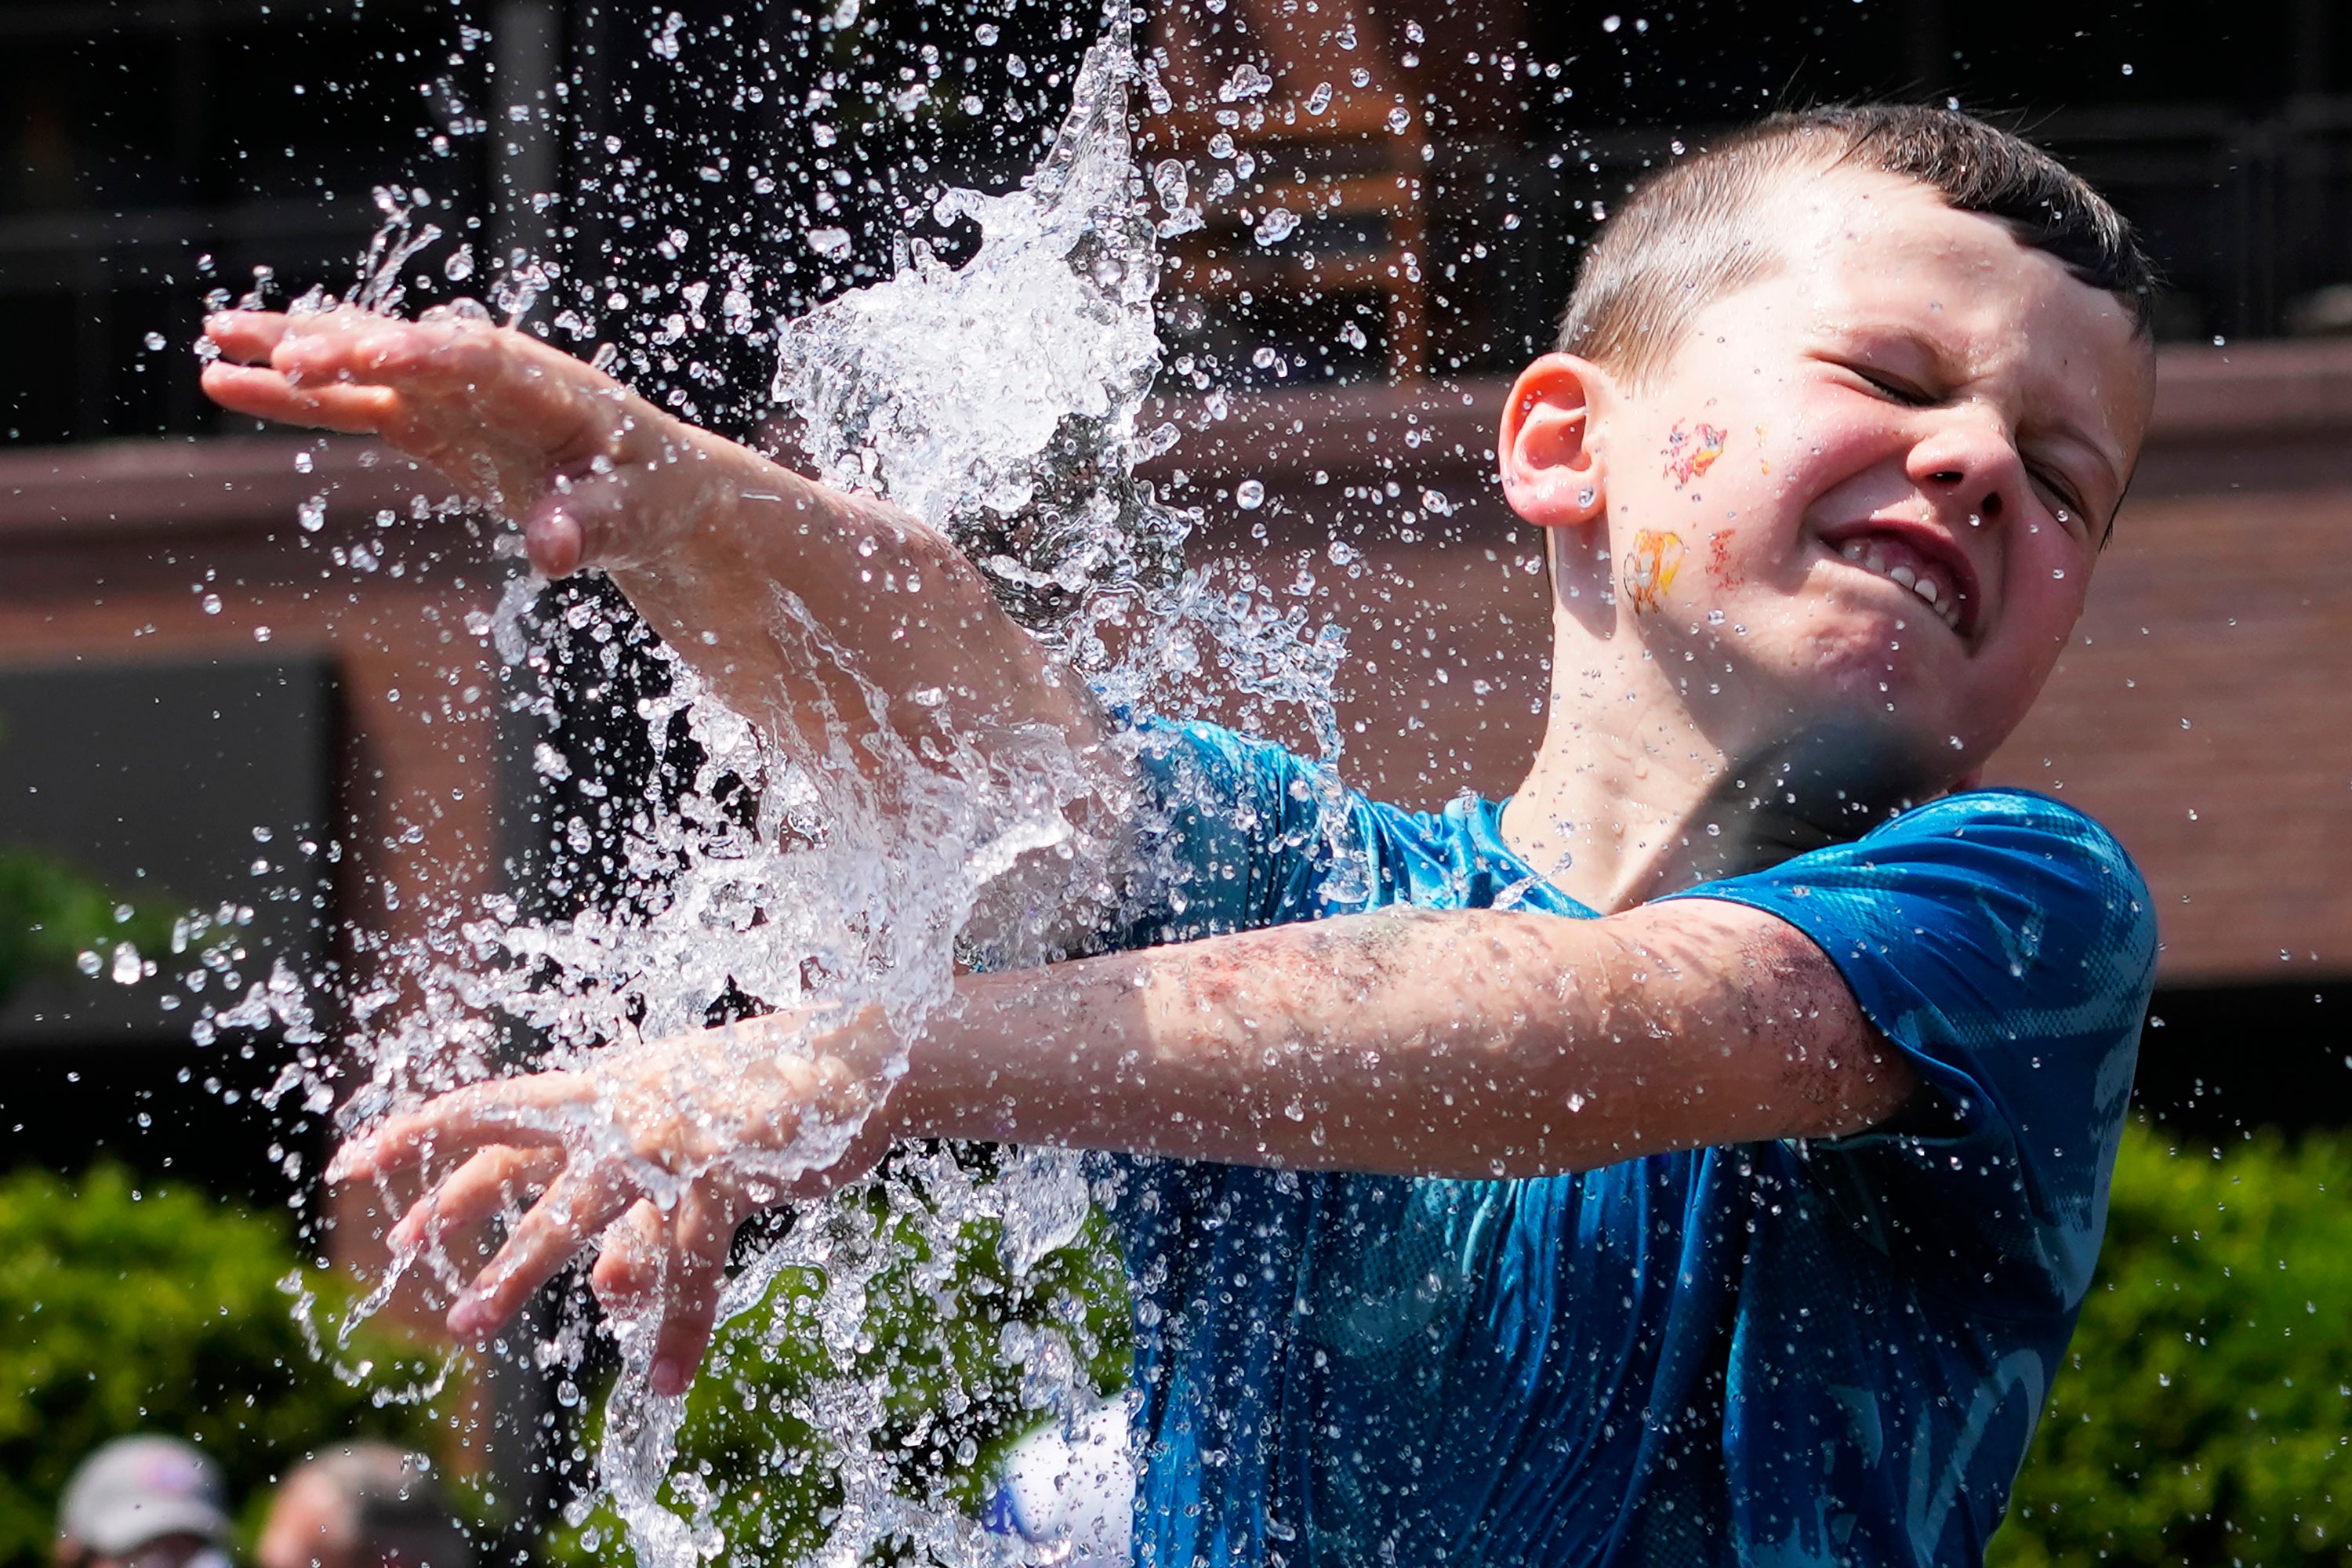 A heat wave is expected to hit much of the US this week from the Midwest to the Northeast. Pictured: a boy cools off at a fountain during hot weather in Chicago on June 16